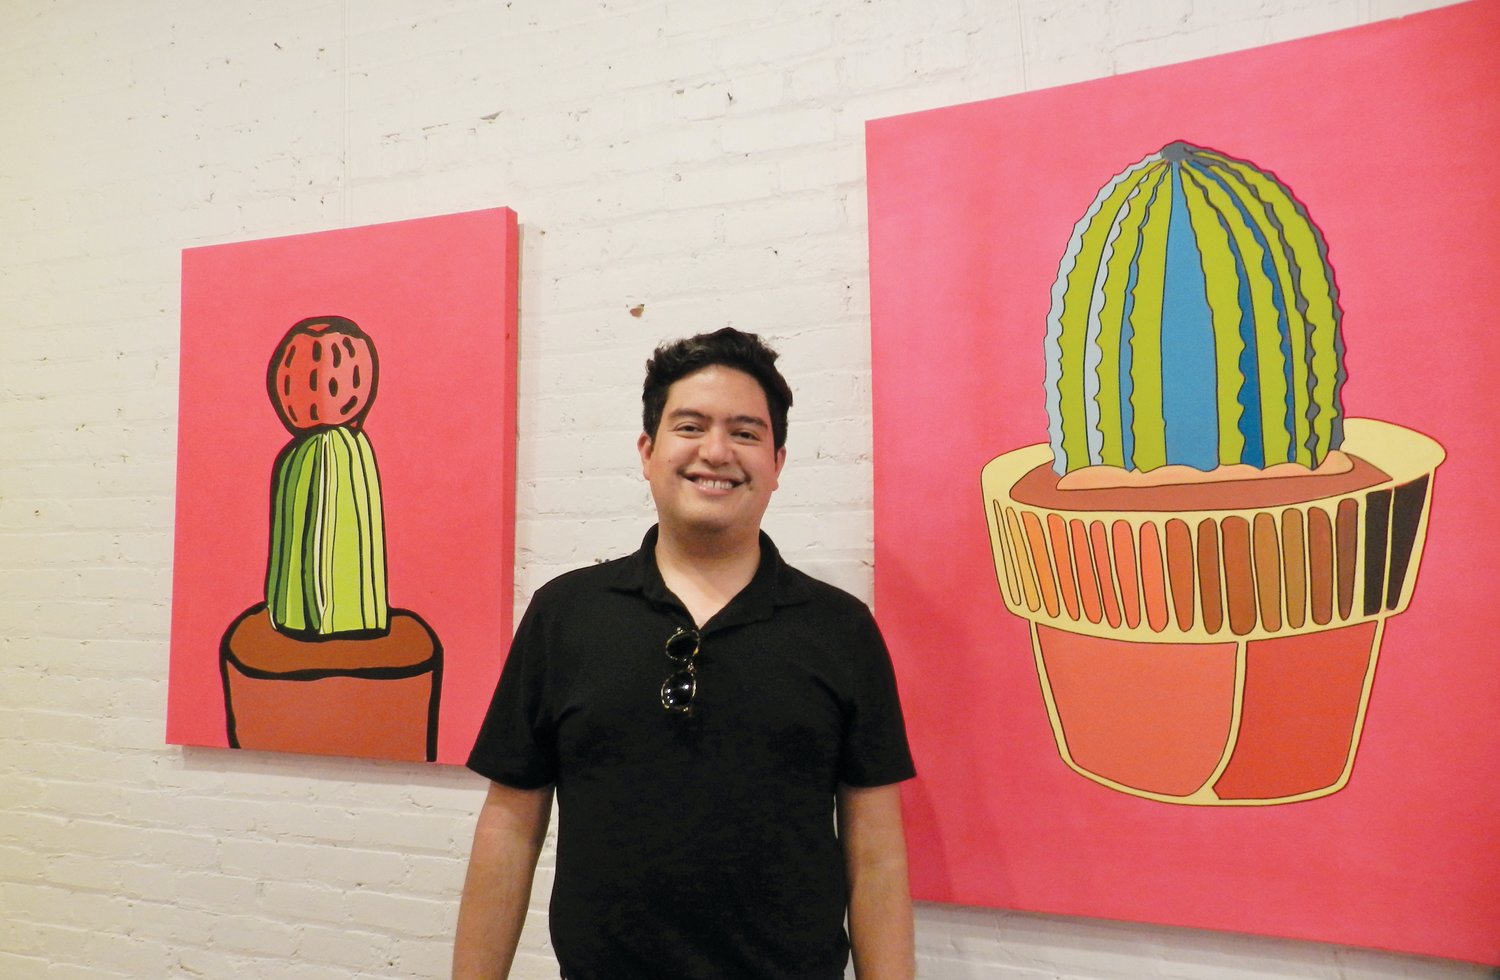 Mexican-American artist Antonio Alanís inside the N.C. Arts Incubator last Friday night with his 'Latinx Visual Resiliency' series, which the gallery displayed in honor of Hispanic Heritage Month.